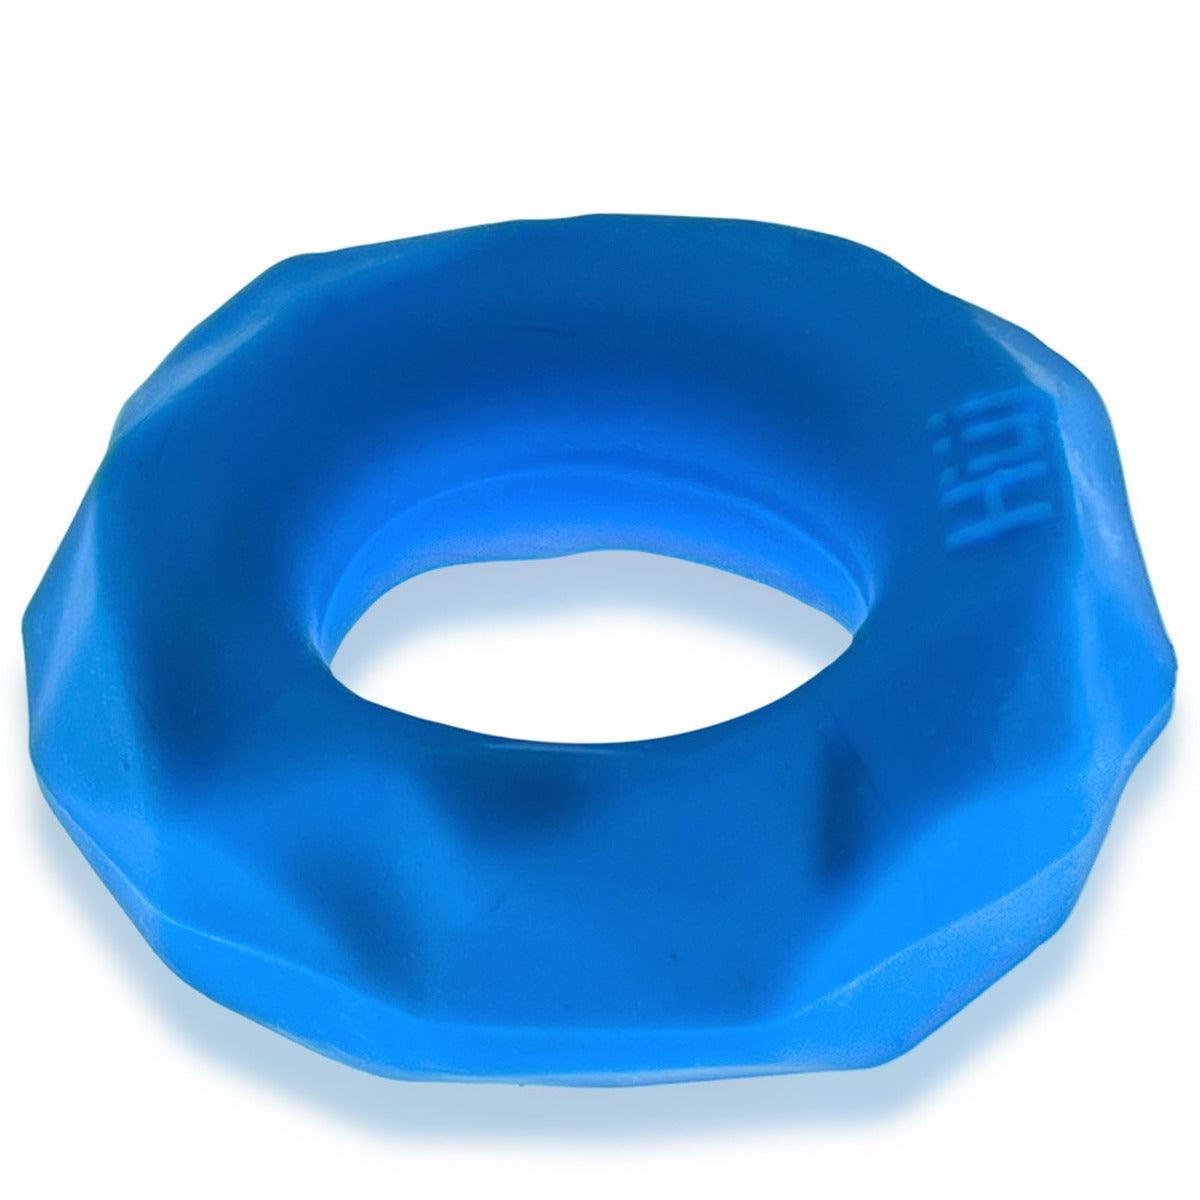 Hunkyjunk Fractal Tactile Silicone Cockring Teal Ice